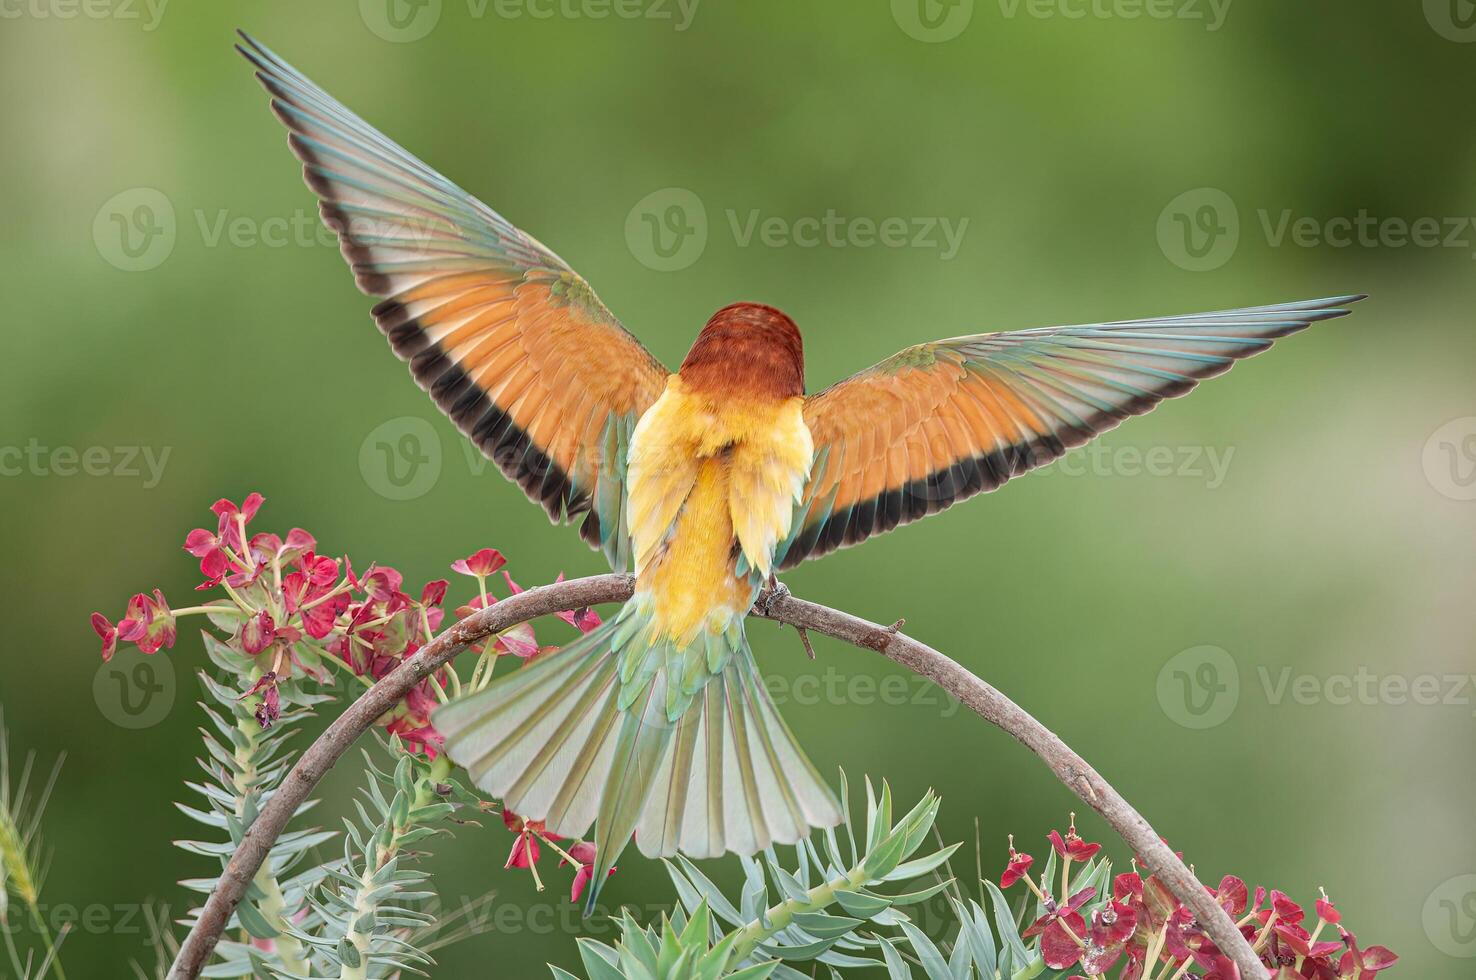 European Bee-eater, Merops apiaster, with wings spread. Green background. Colourful birds. photo